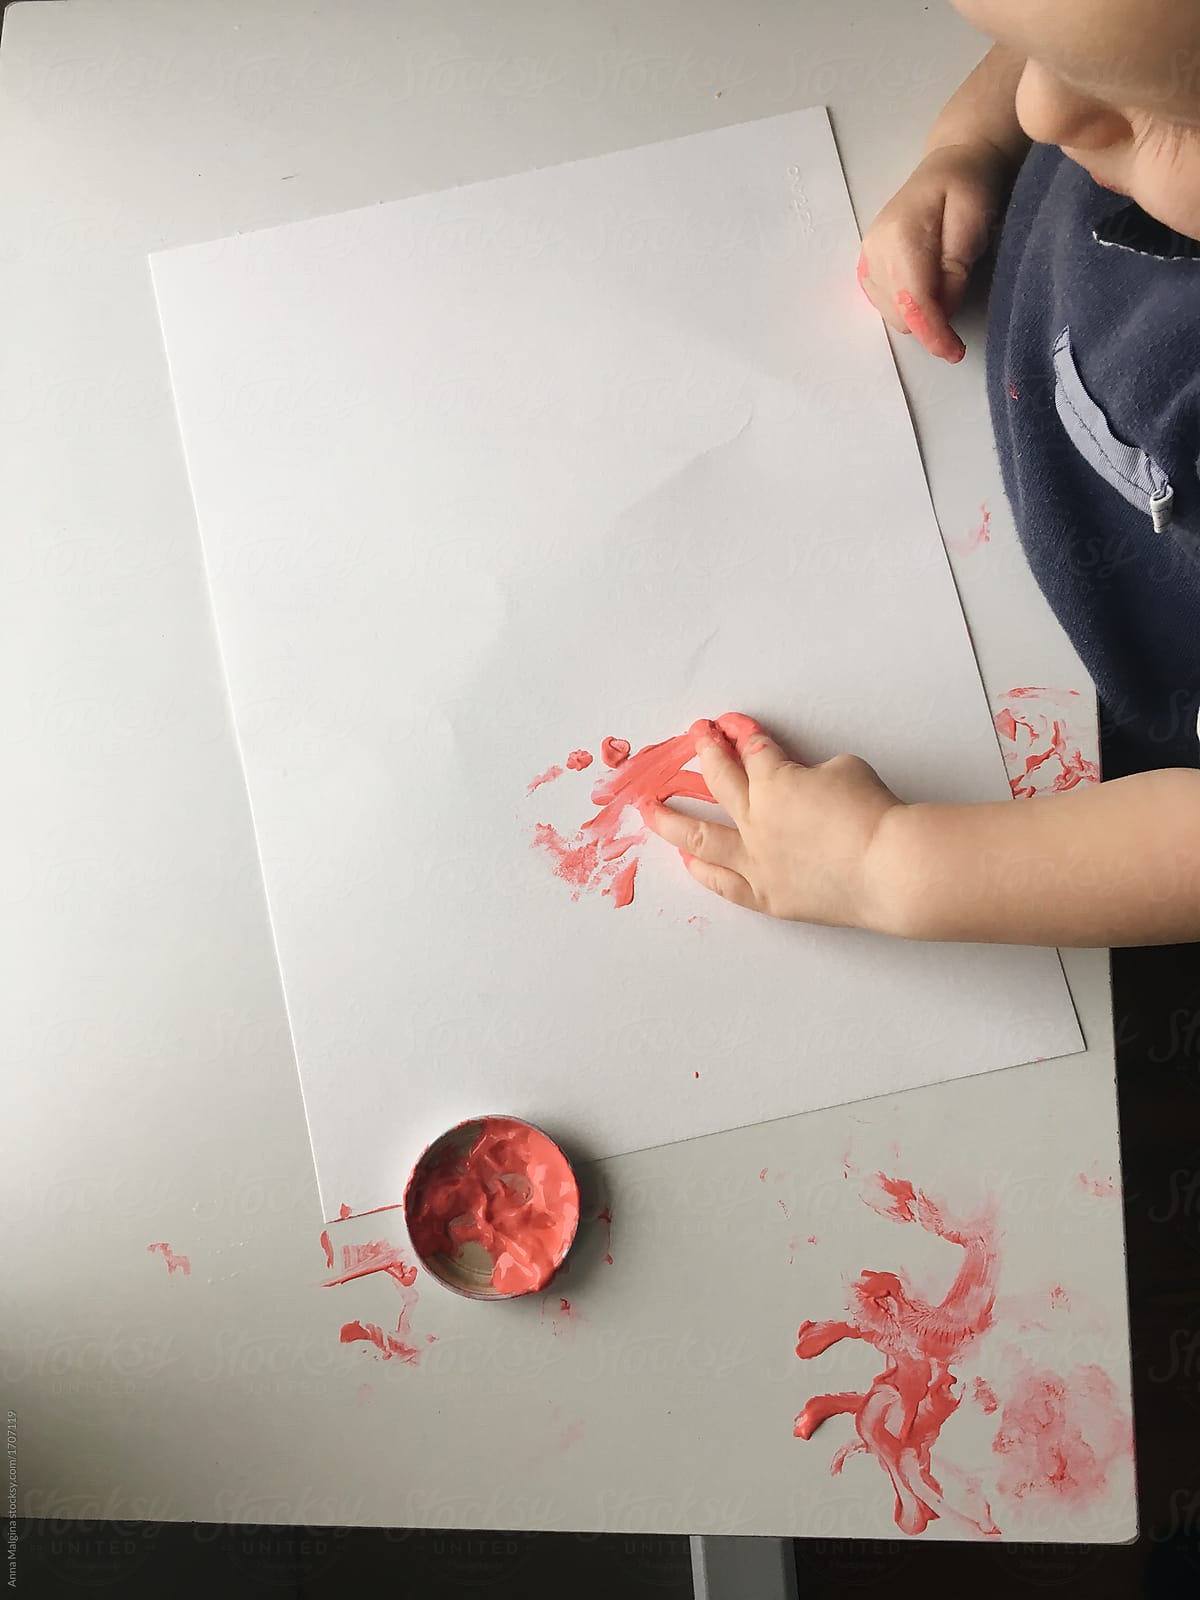 A baby boy painting with hands